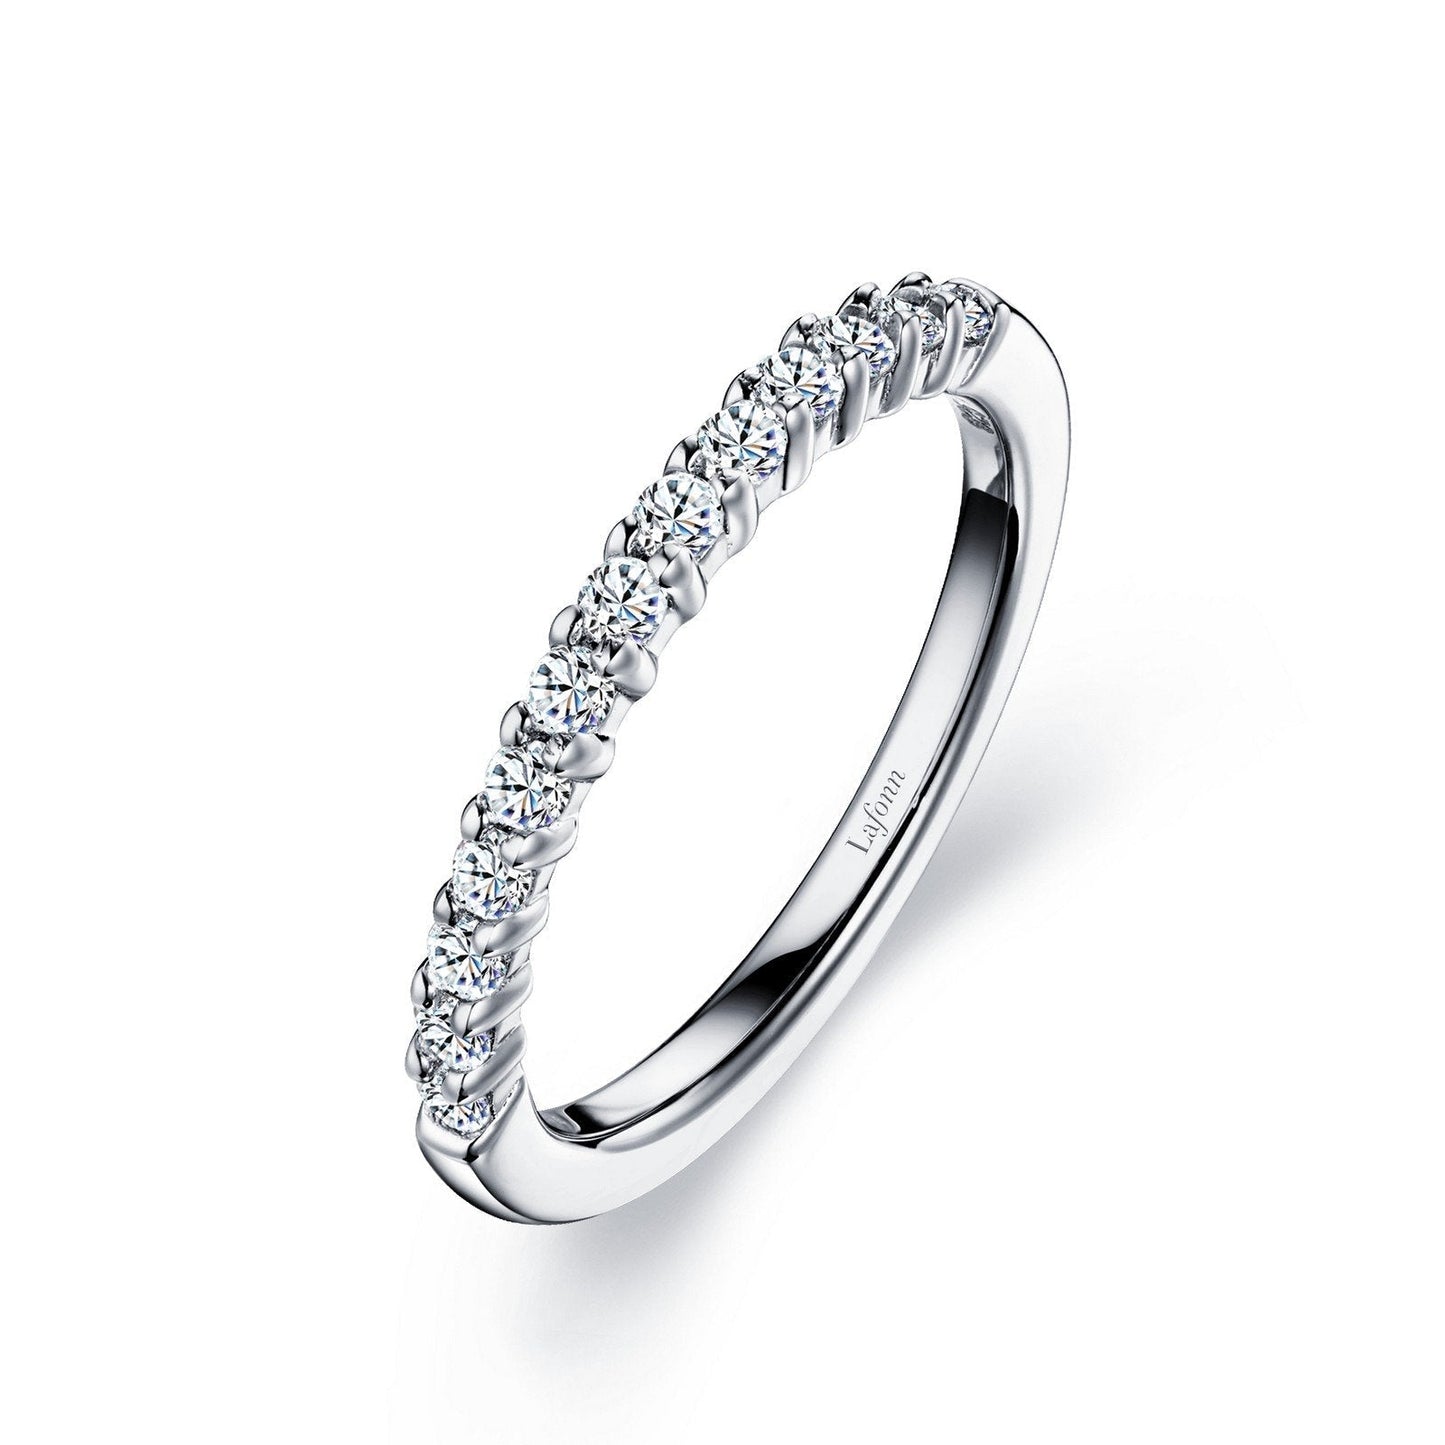 Load image into Gallery viewer, Lafonn 0.35 CTW Half-Eternity Band Simulated Diamond RINGS Size 8 Platinum 0.35 CTS Approx. 1.9mm (W)
